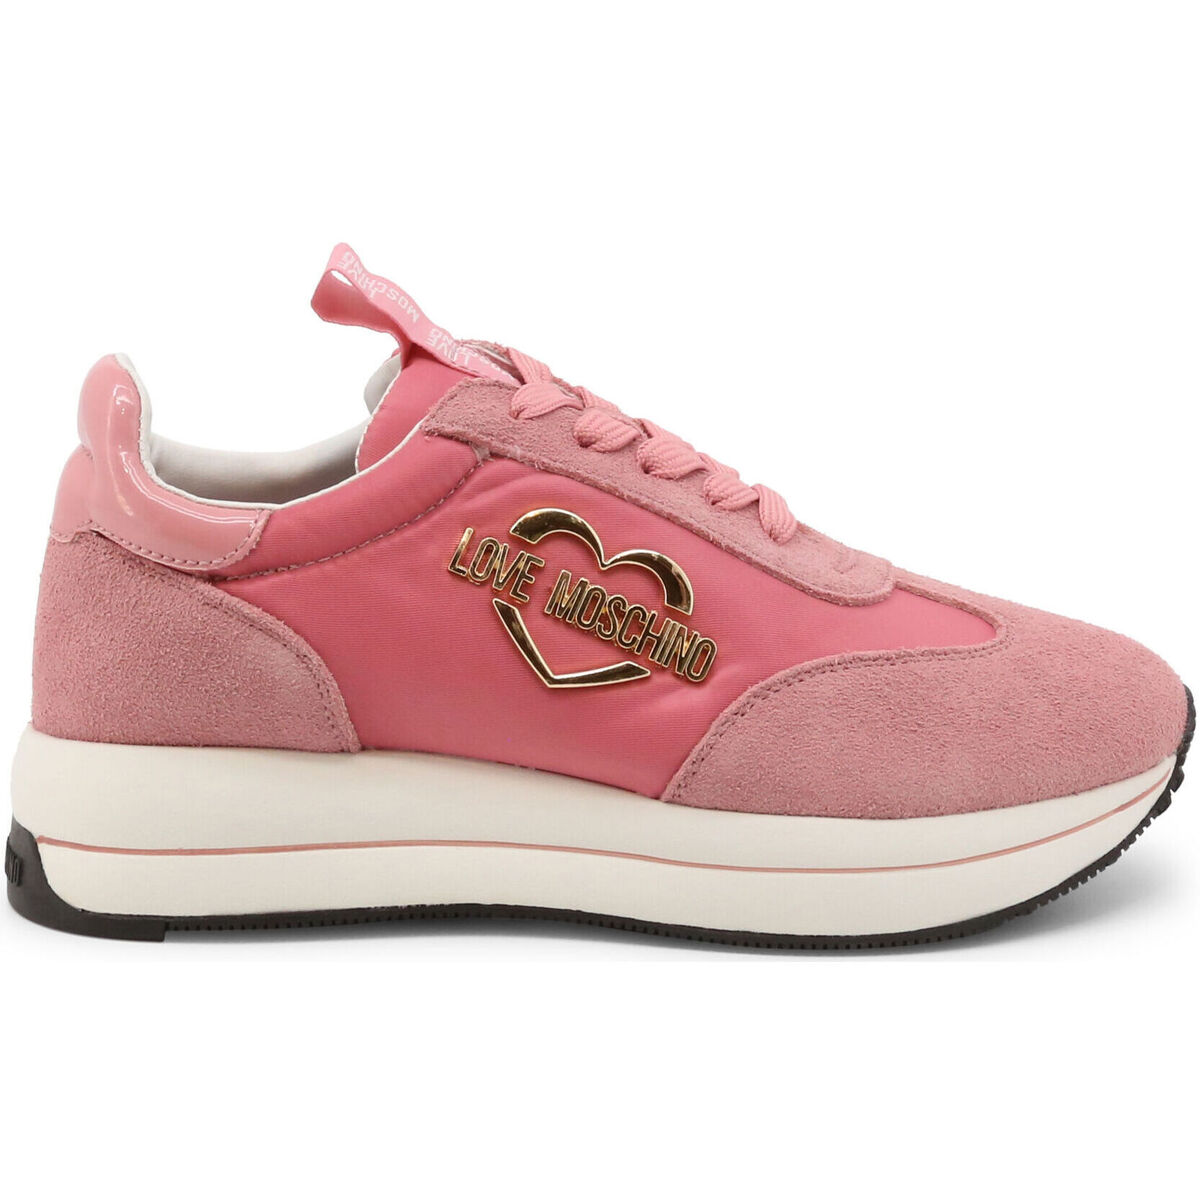 Xαμηλά Sneakers Love Moschino ja15354g1fin2-60a pink